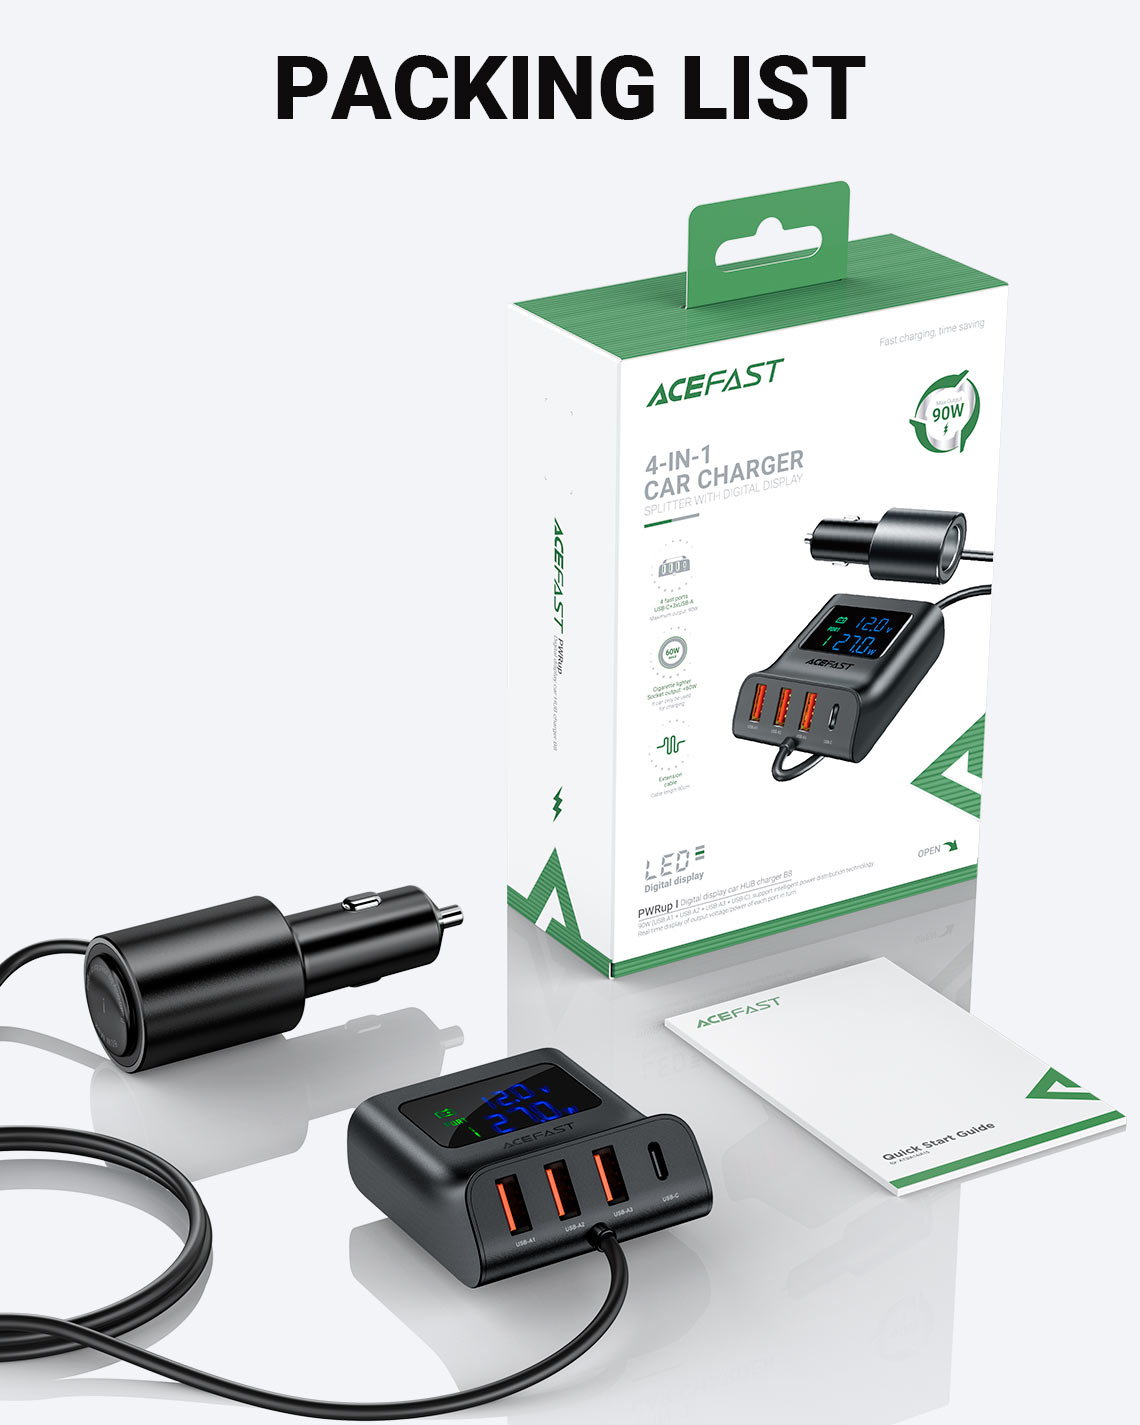 acefast-b8-car-hub-charger-packing-list